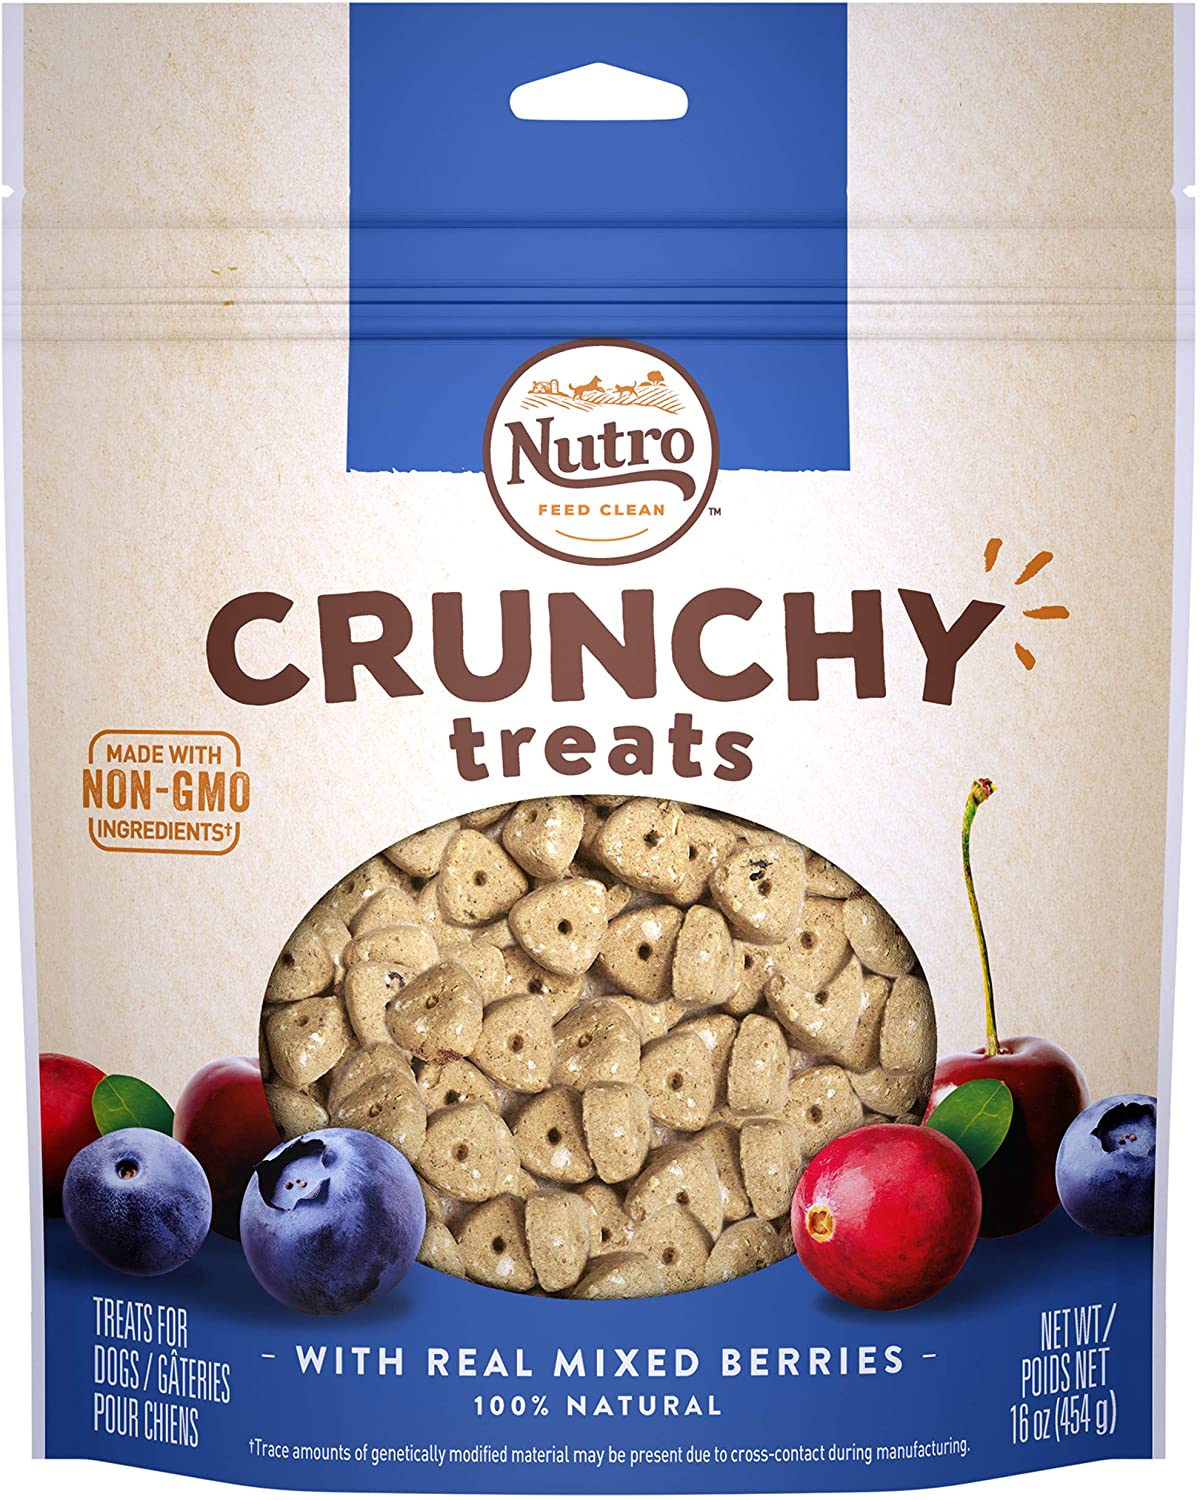 Select Amazon Accounts: 16-Oz Nutro Crunchy Natural Biscuit Dog Treats (Mixed Berries) $1.46 AC w/ Subscribe & Save